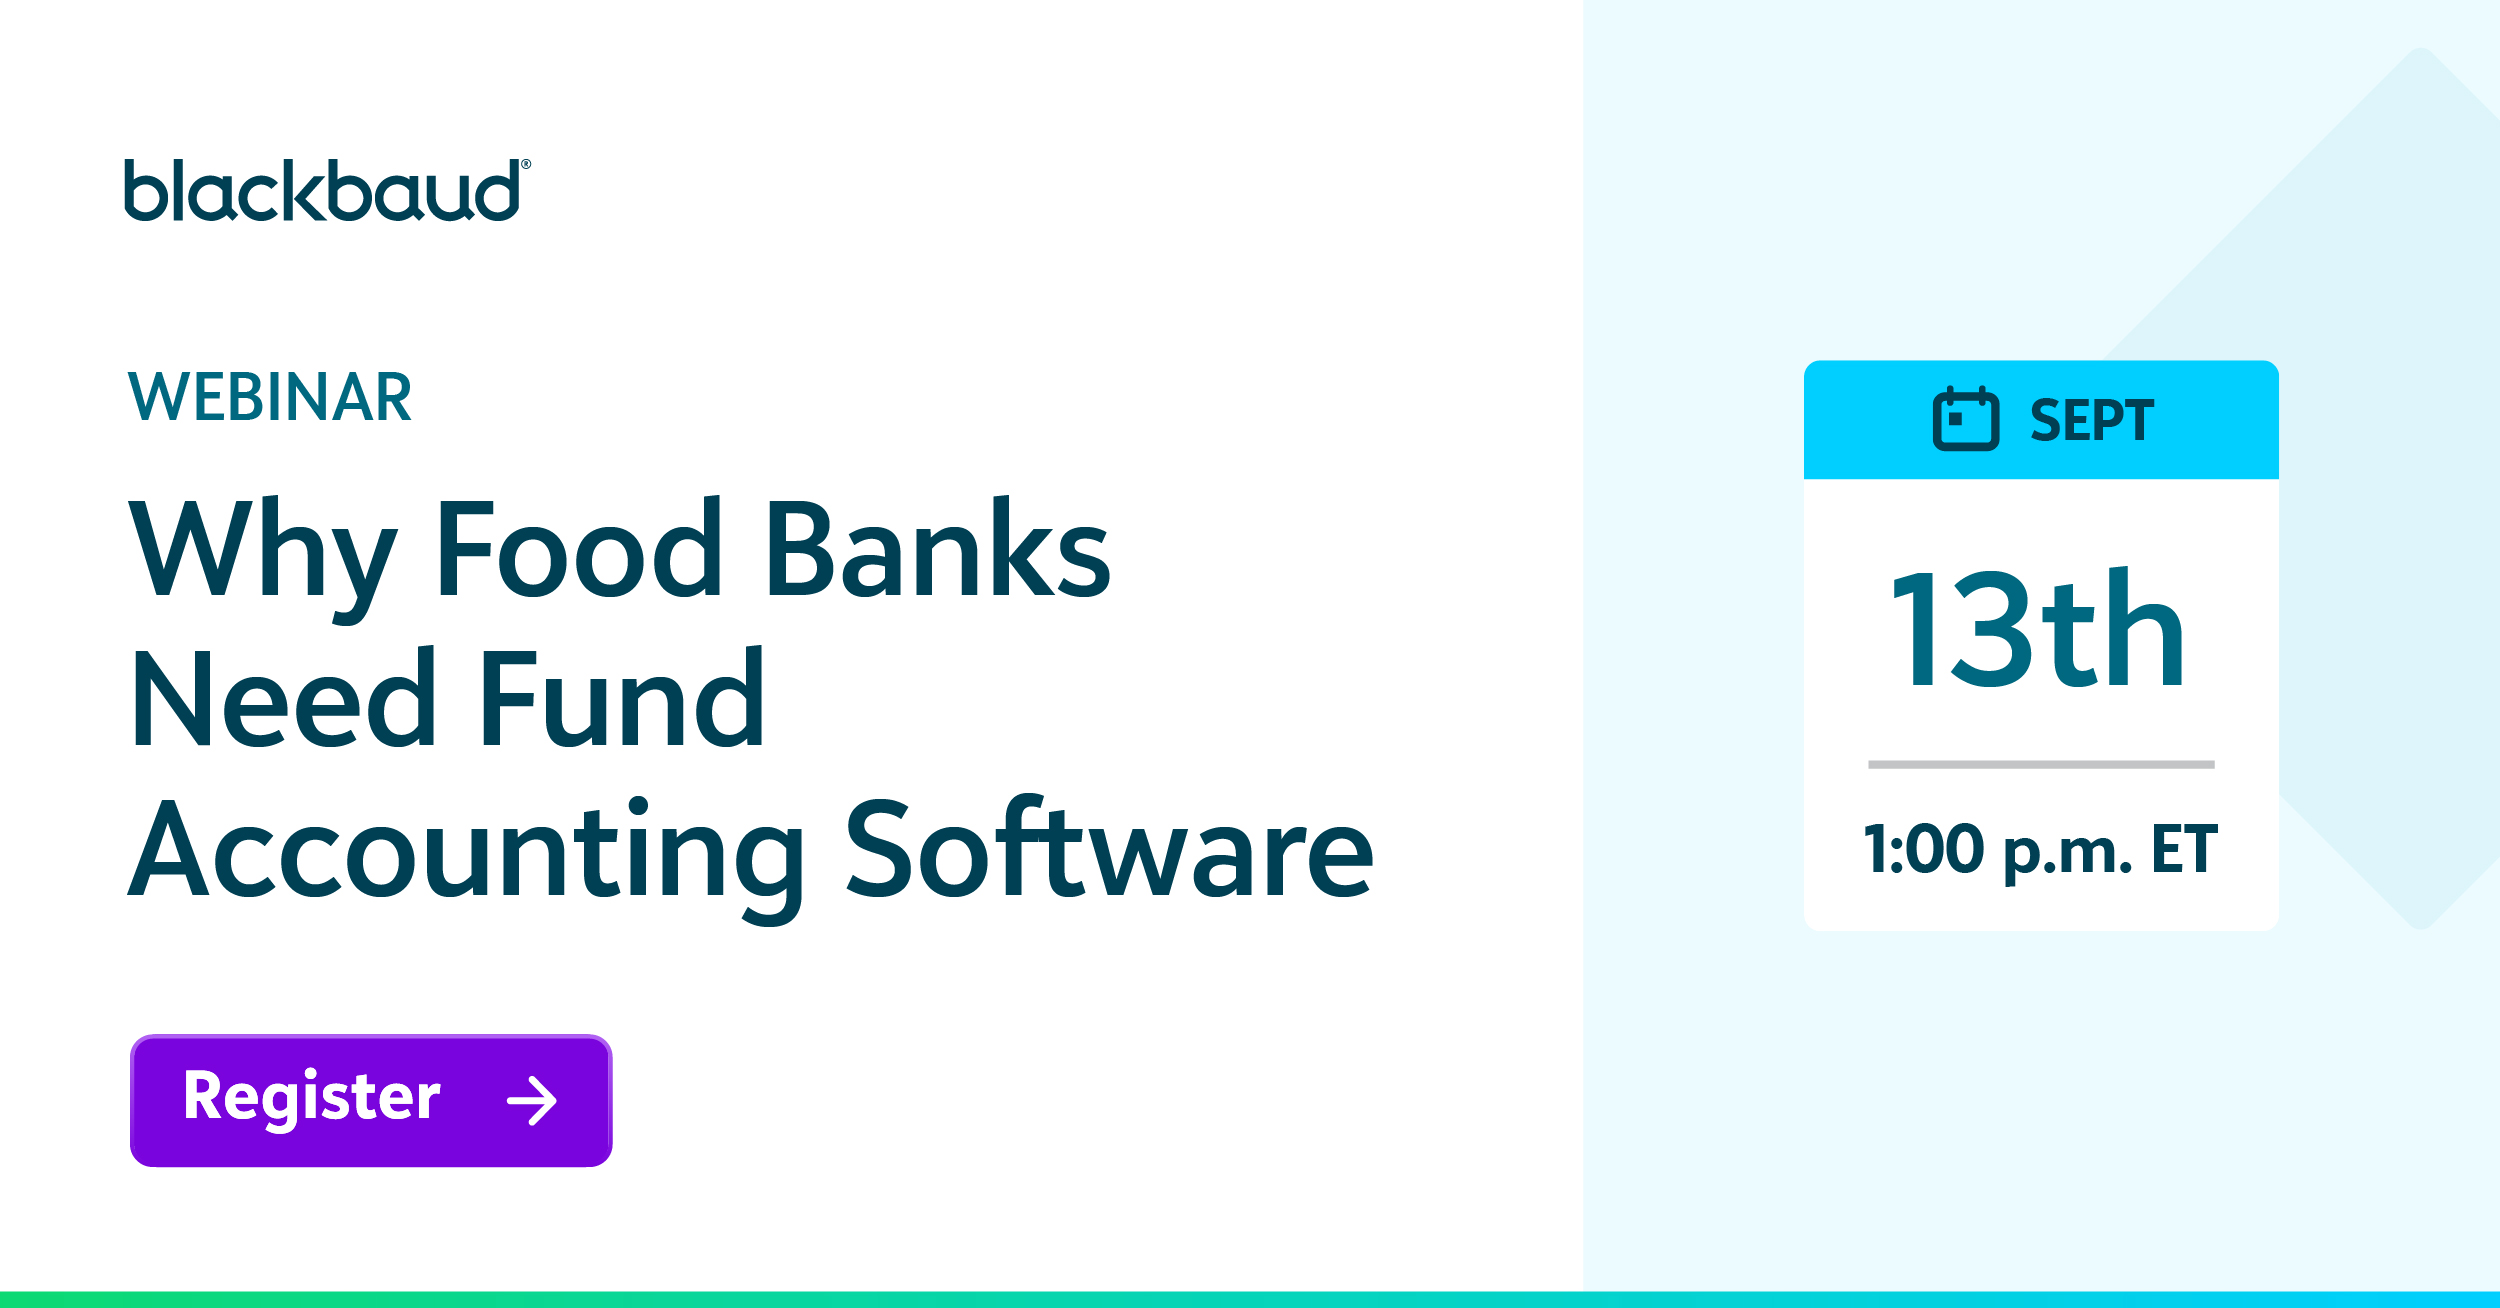 Integrate and Innovate: Why Food Banks Need Fund Accounting Software 4042